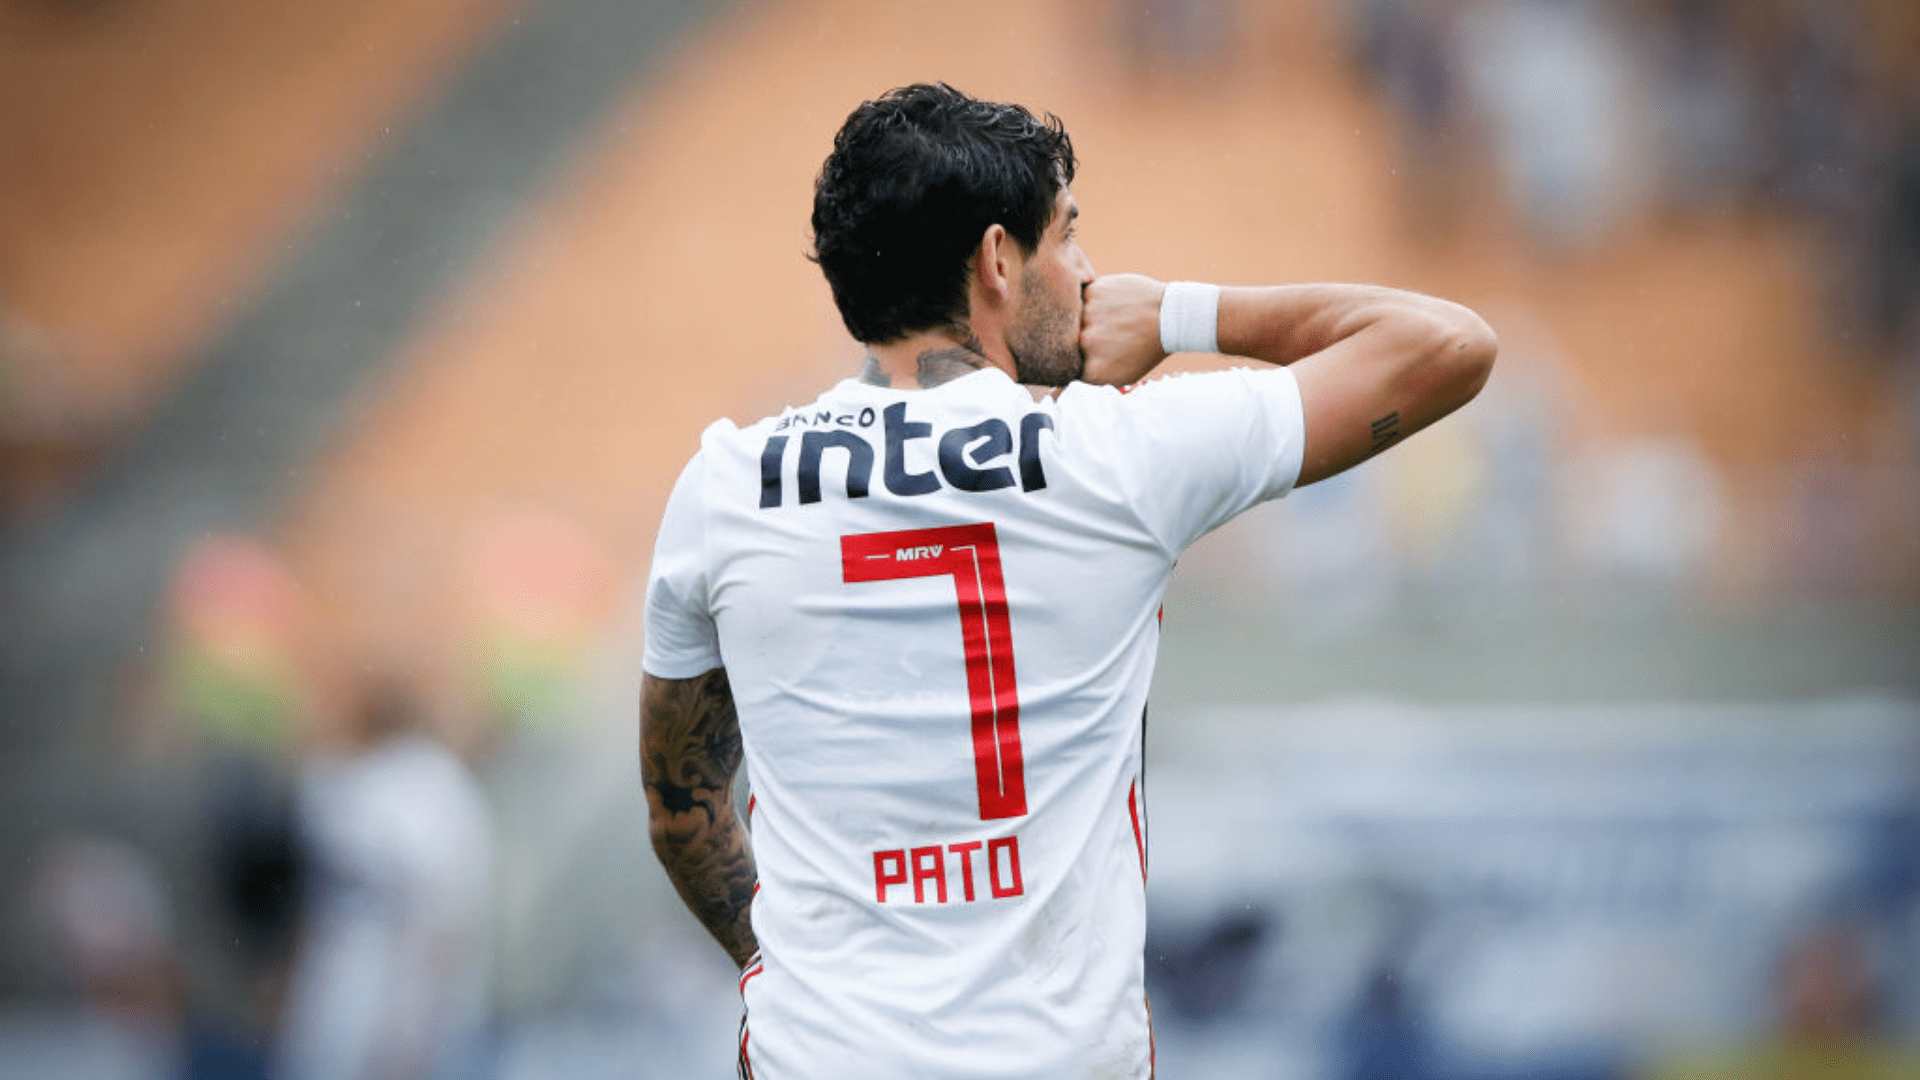 Pato arrives for his third spell at Tricolor (Credit: Getty Images)